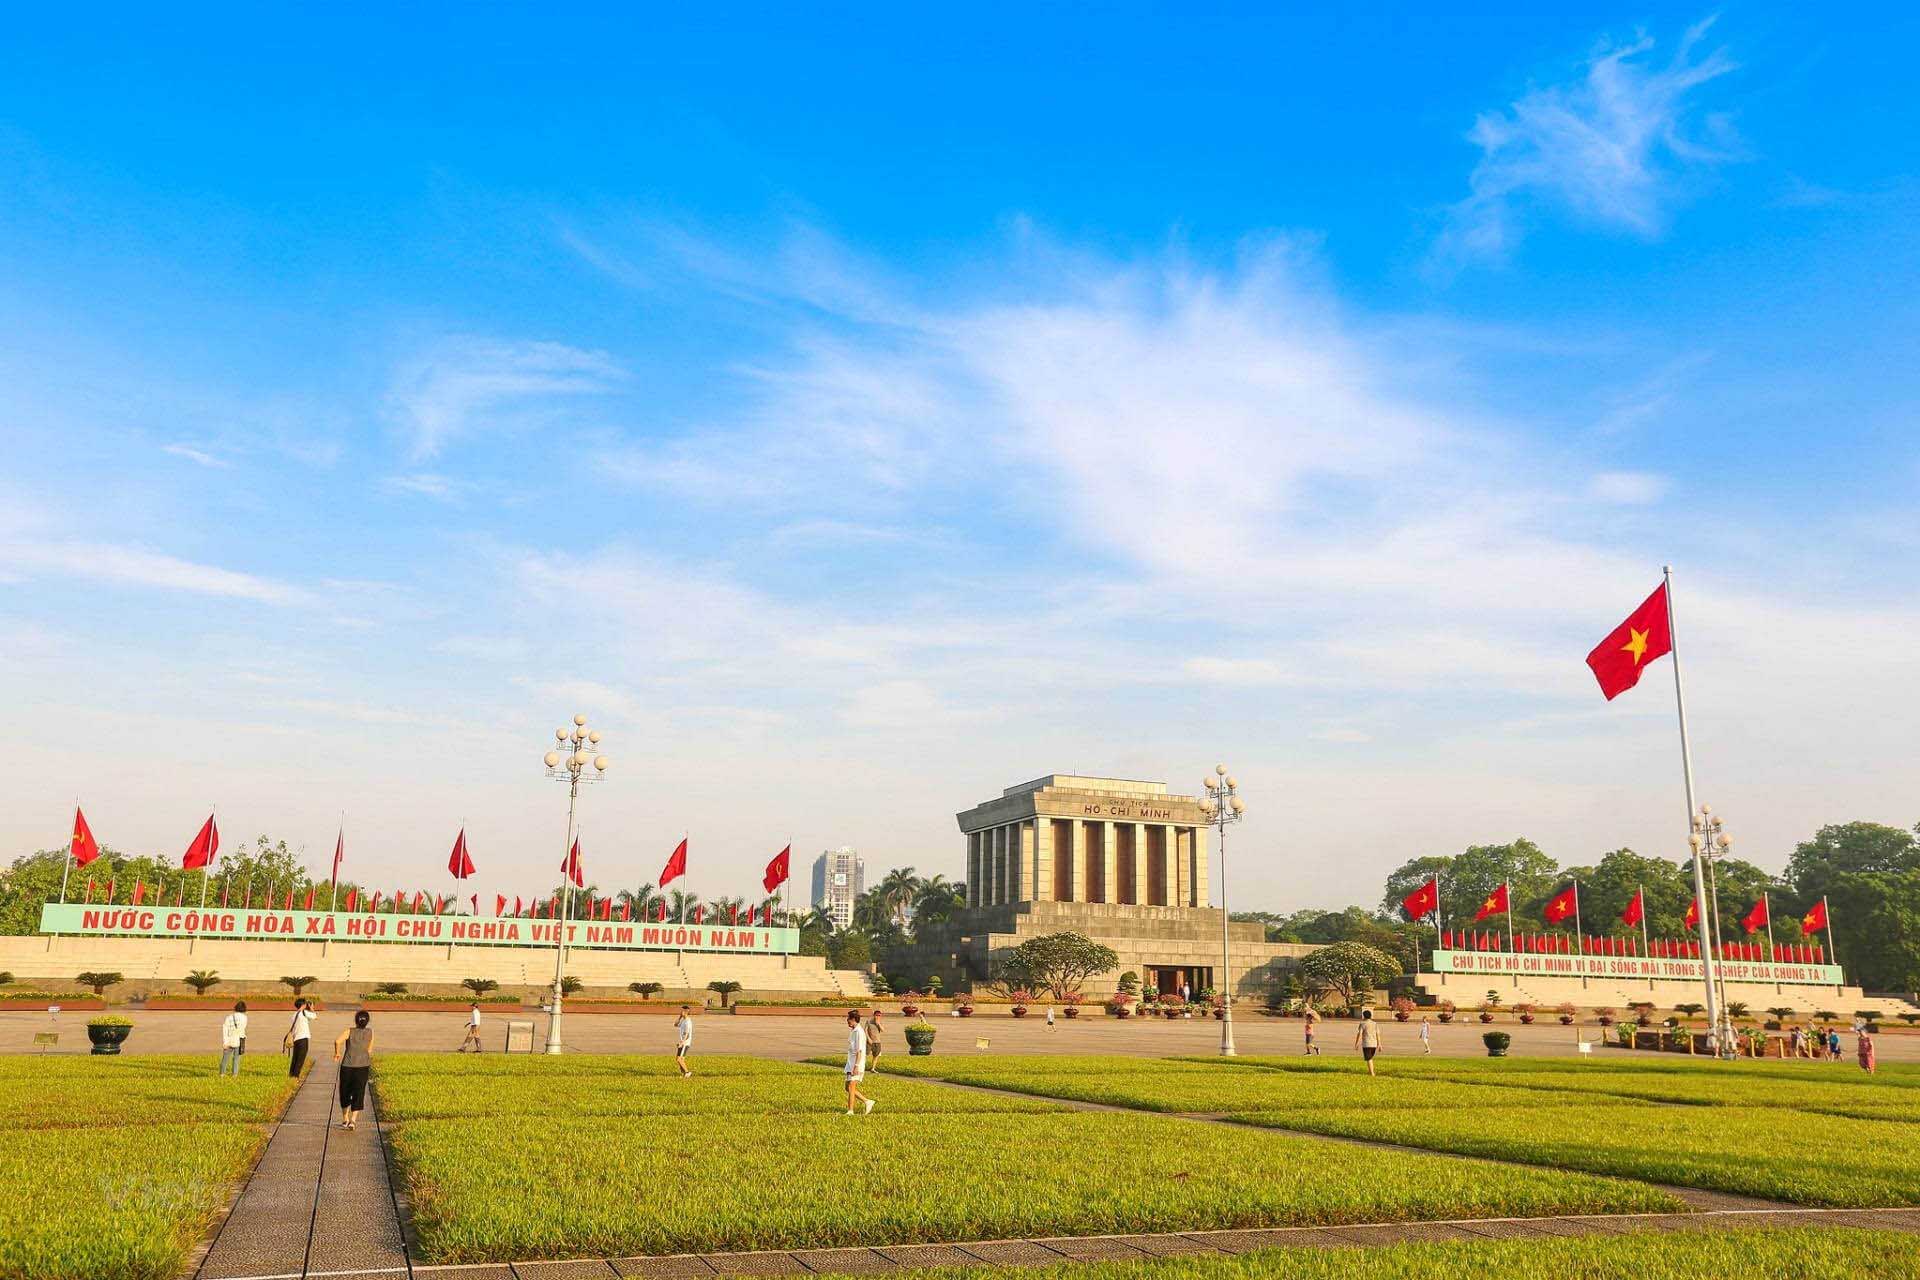 ho chi minh mausoleum in the morning